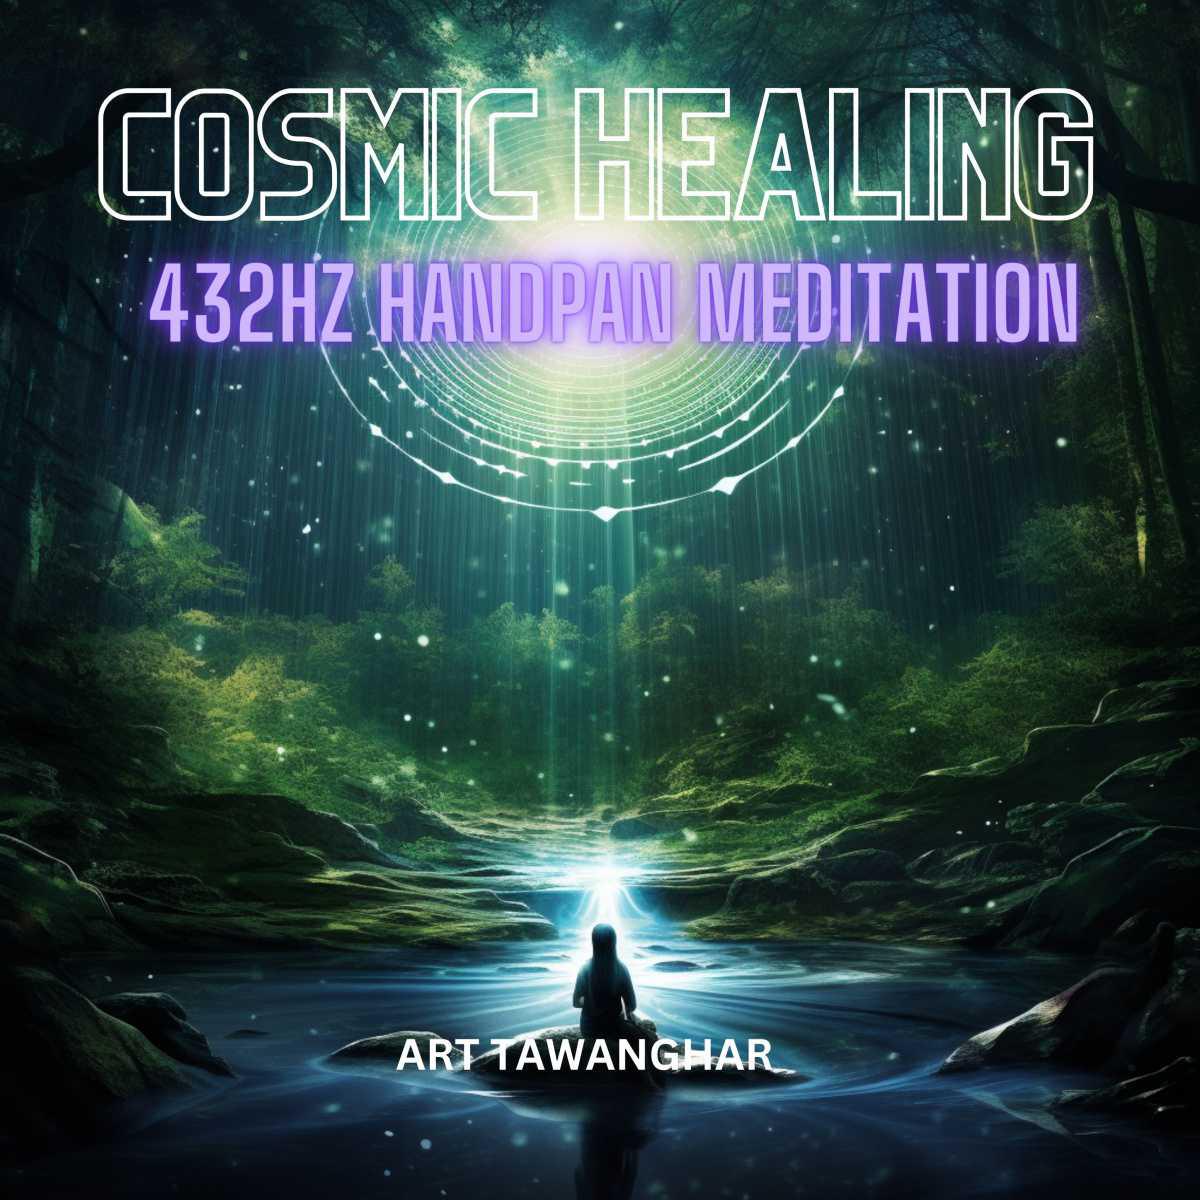 The B Amara Musical Scale, 432Hz, and the Ancient Art of Healing